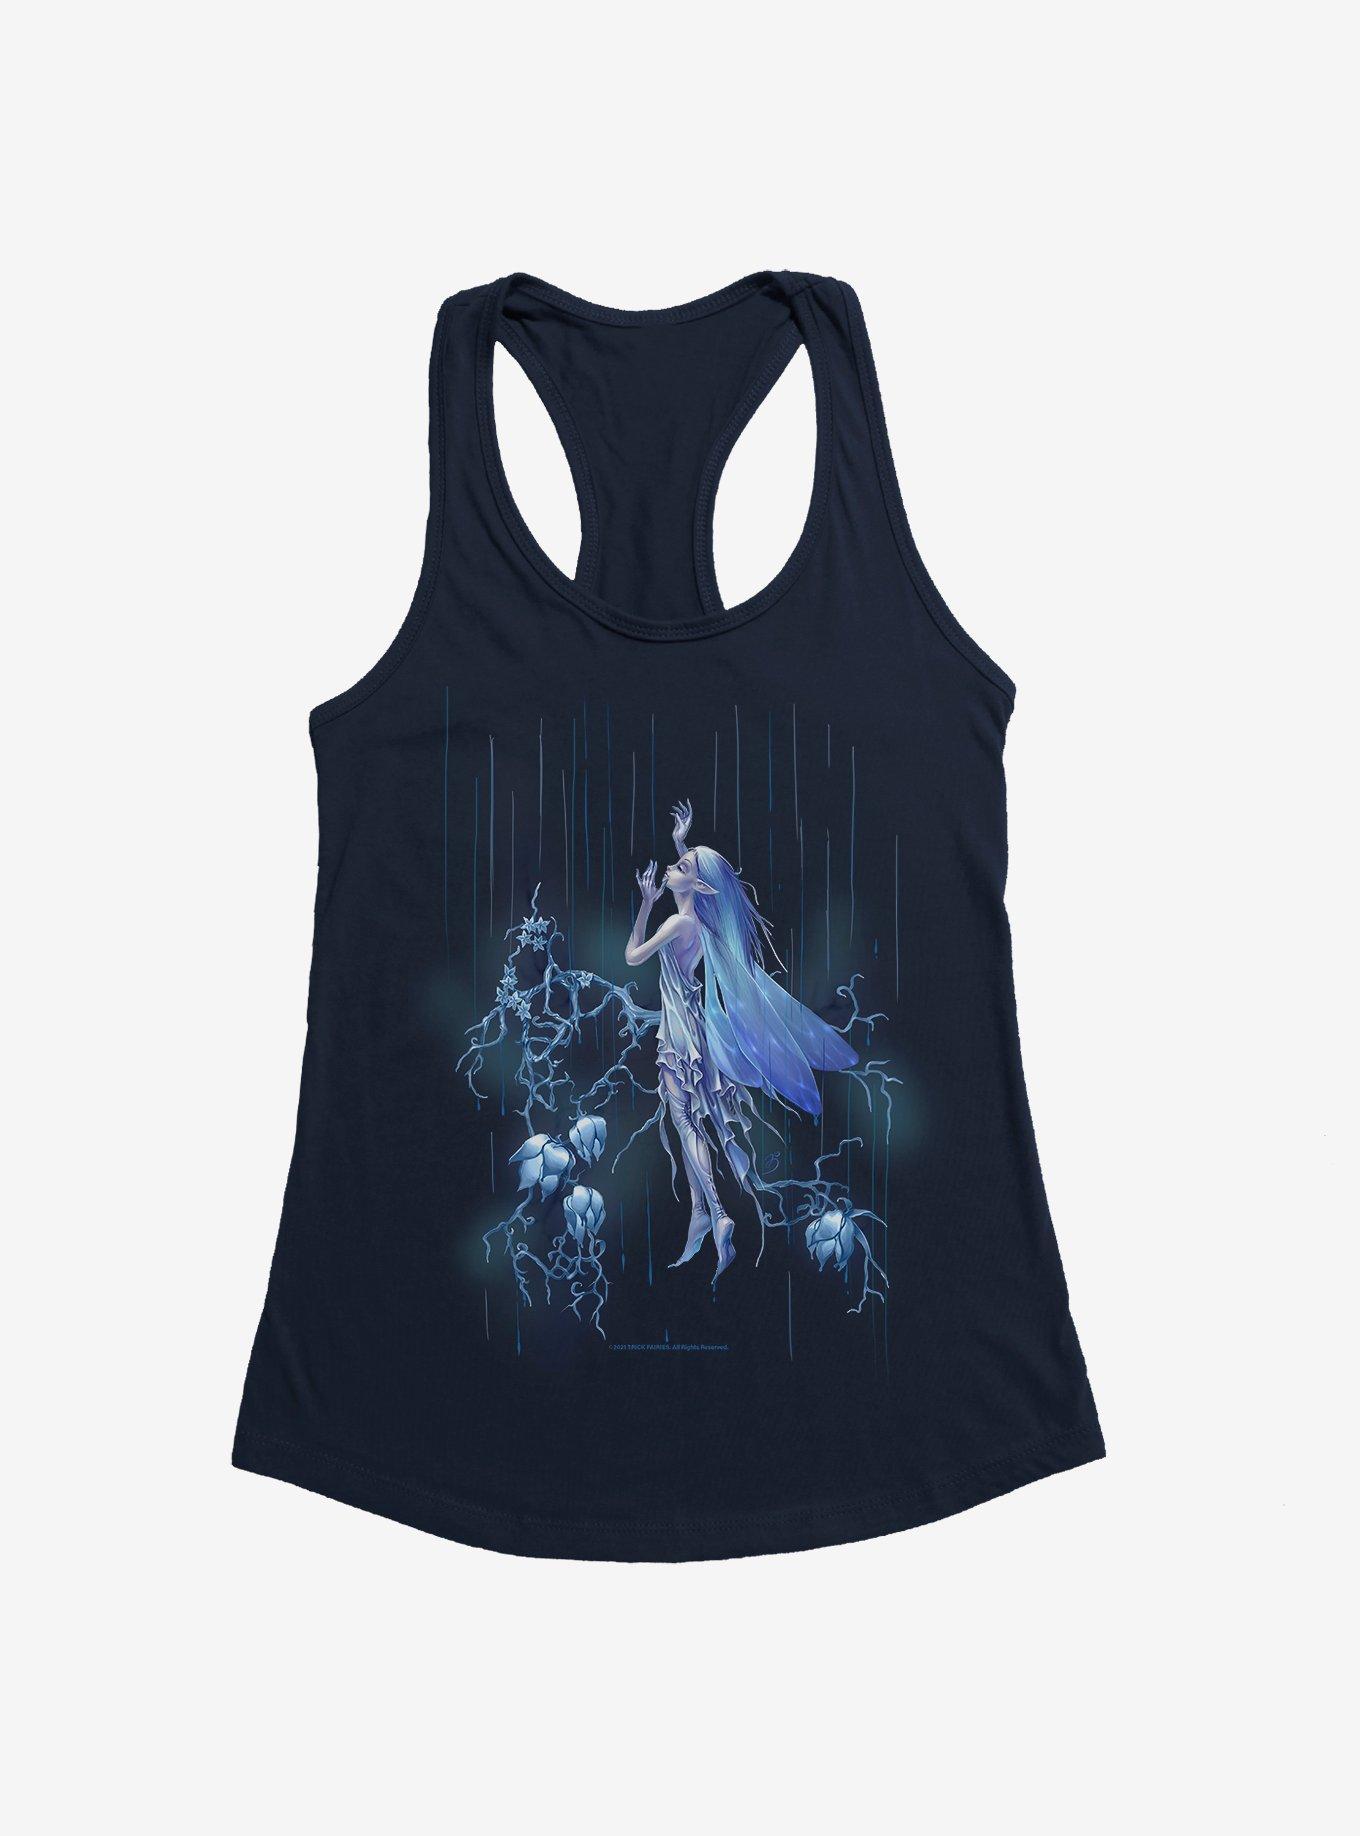 Fairies By Trick Storm Fairy Girls Tank, NAVY, hi-res